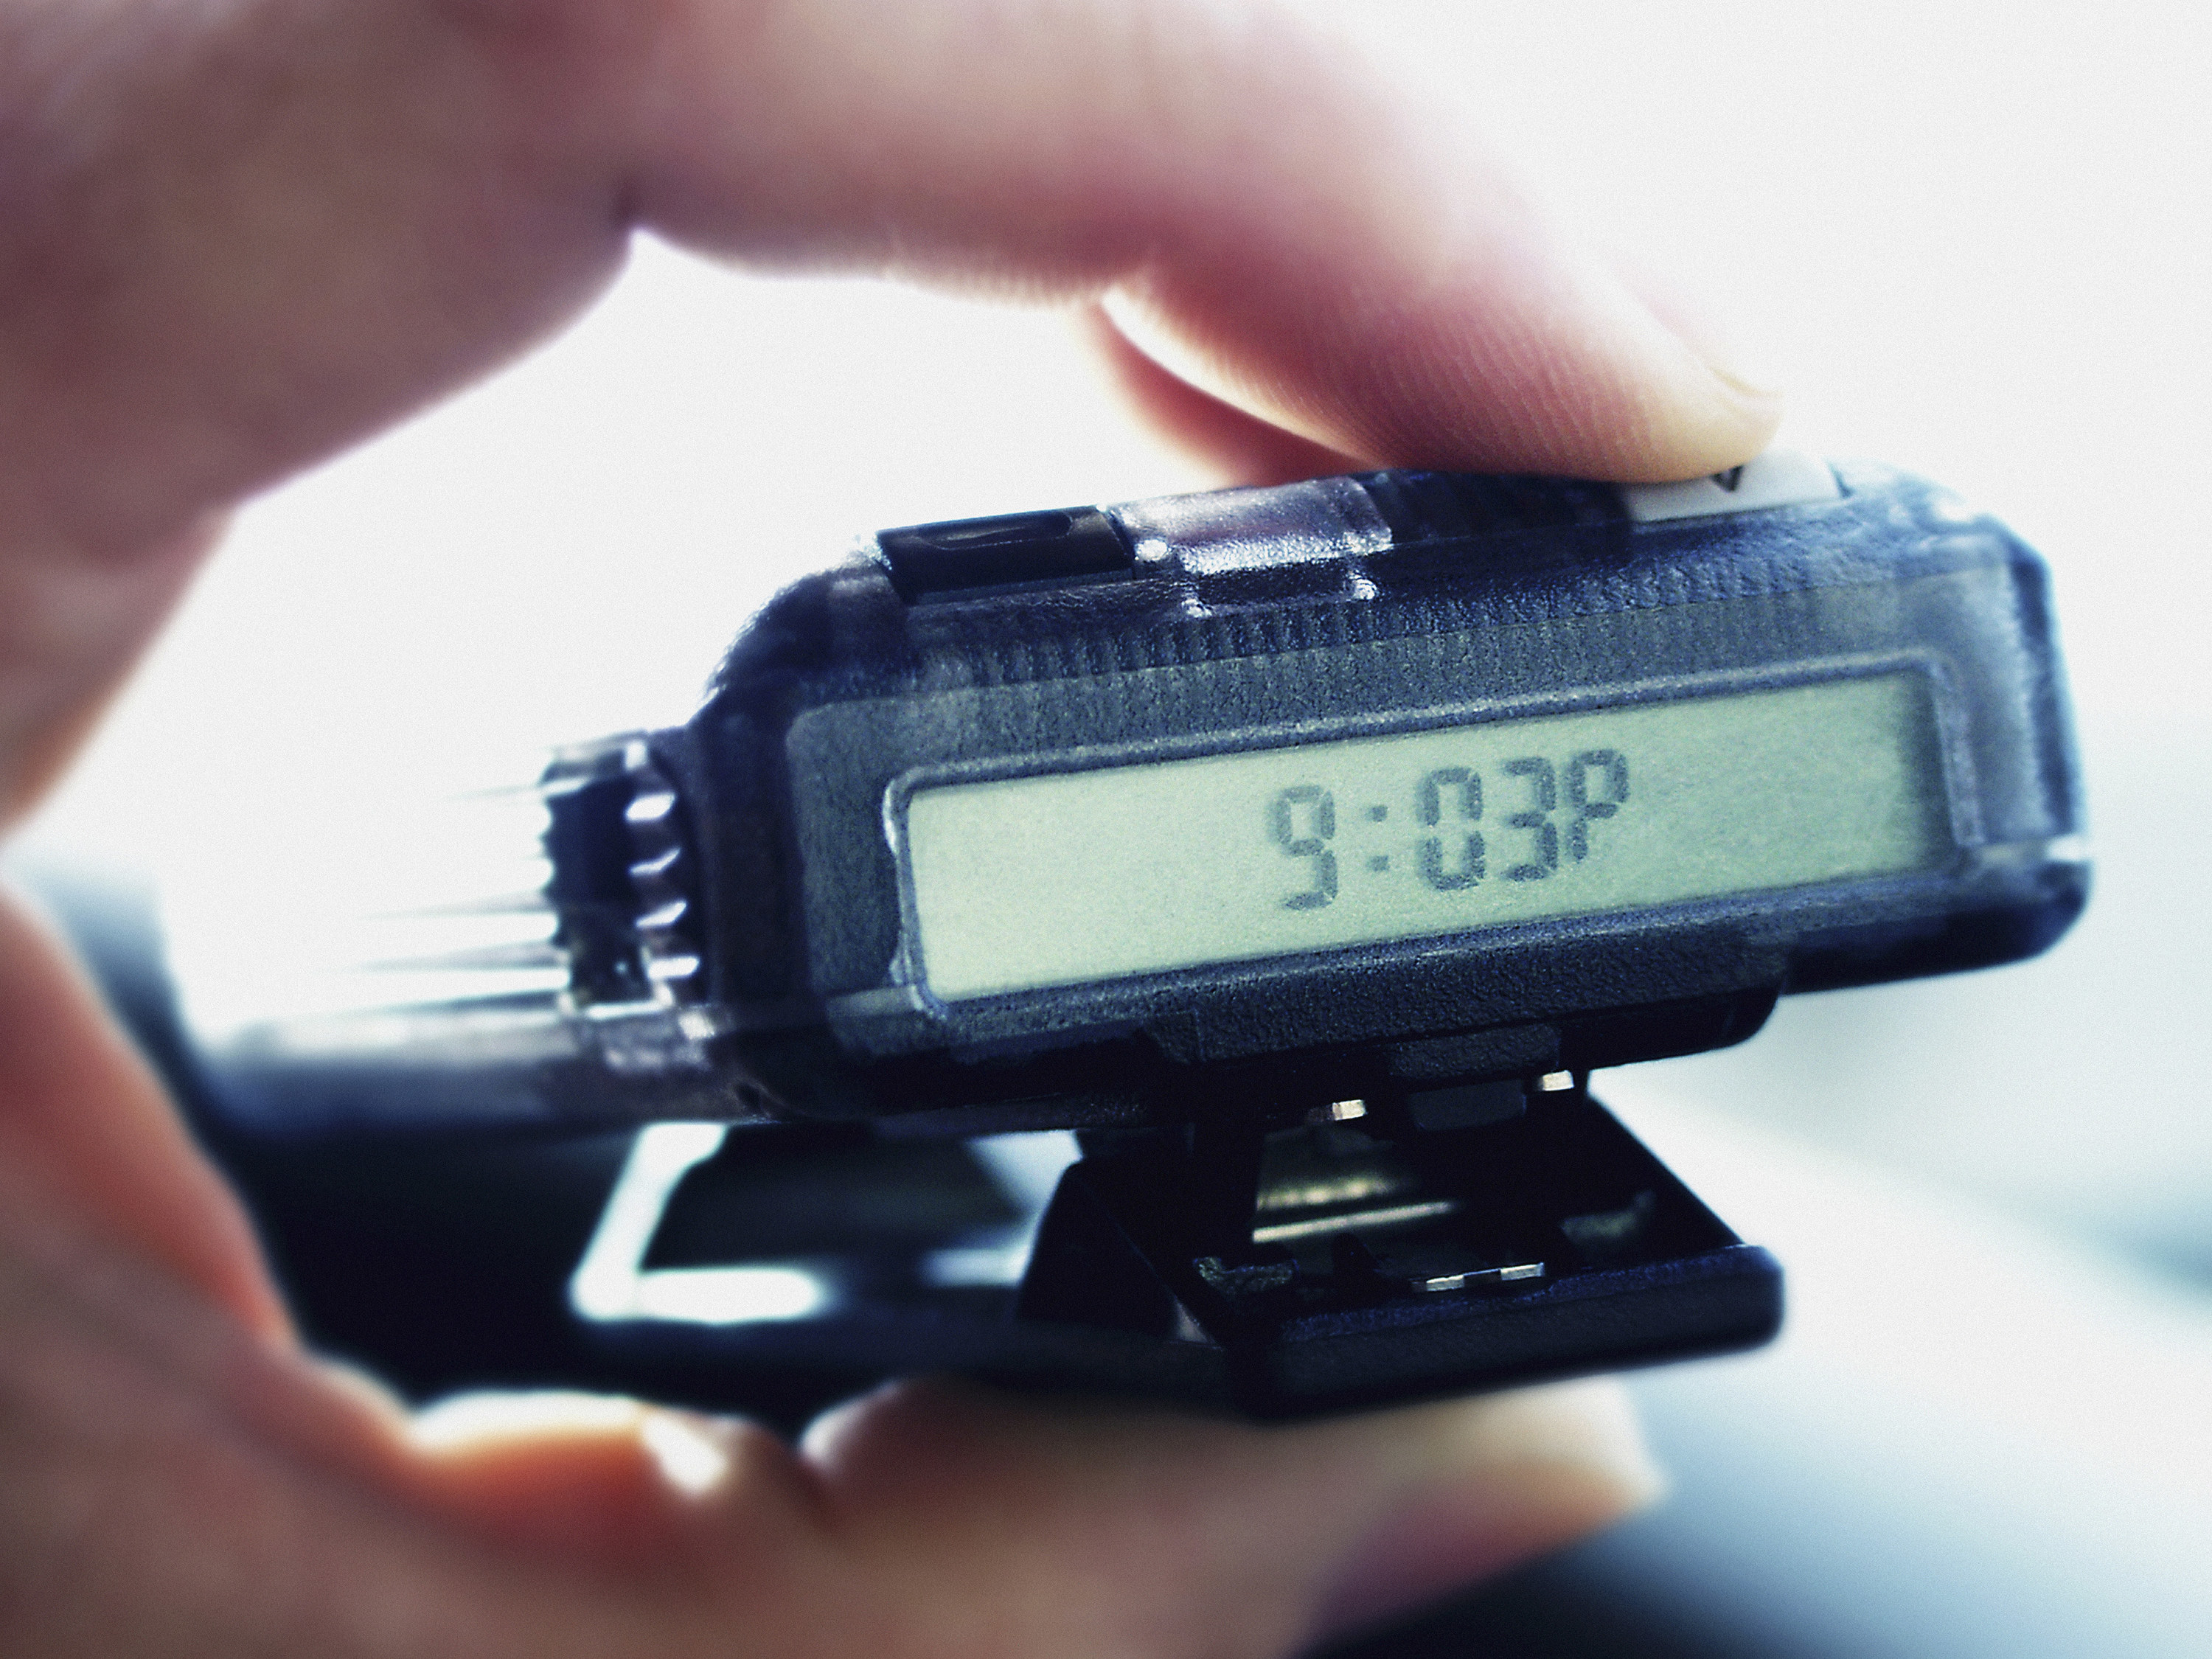 time shown on a pager